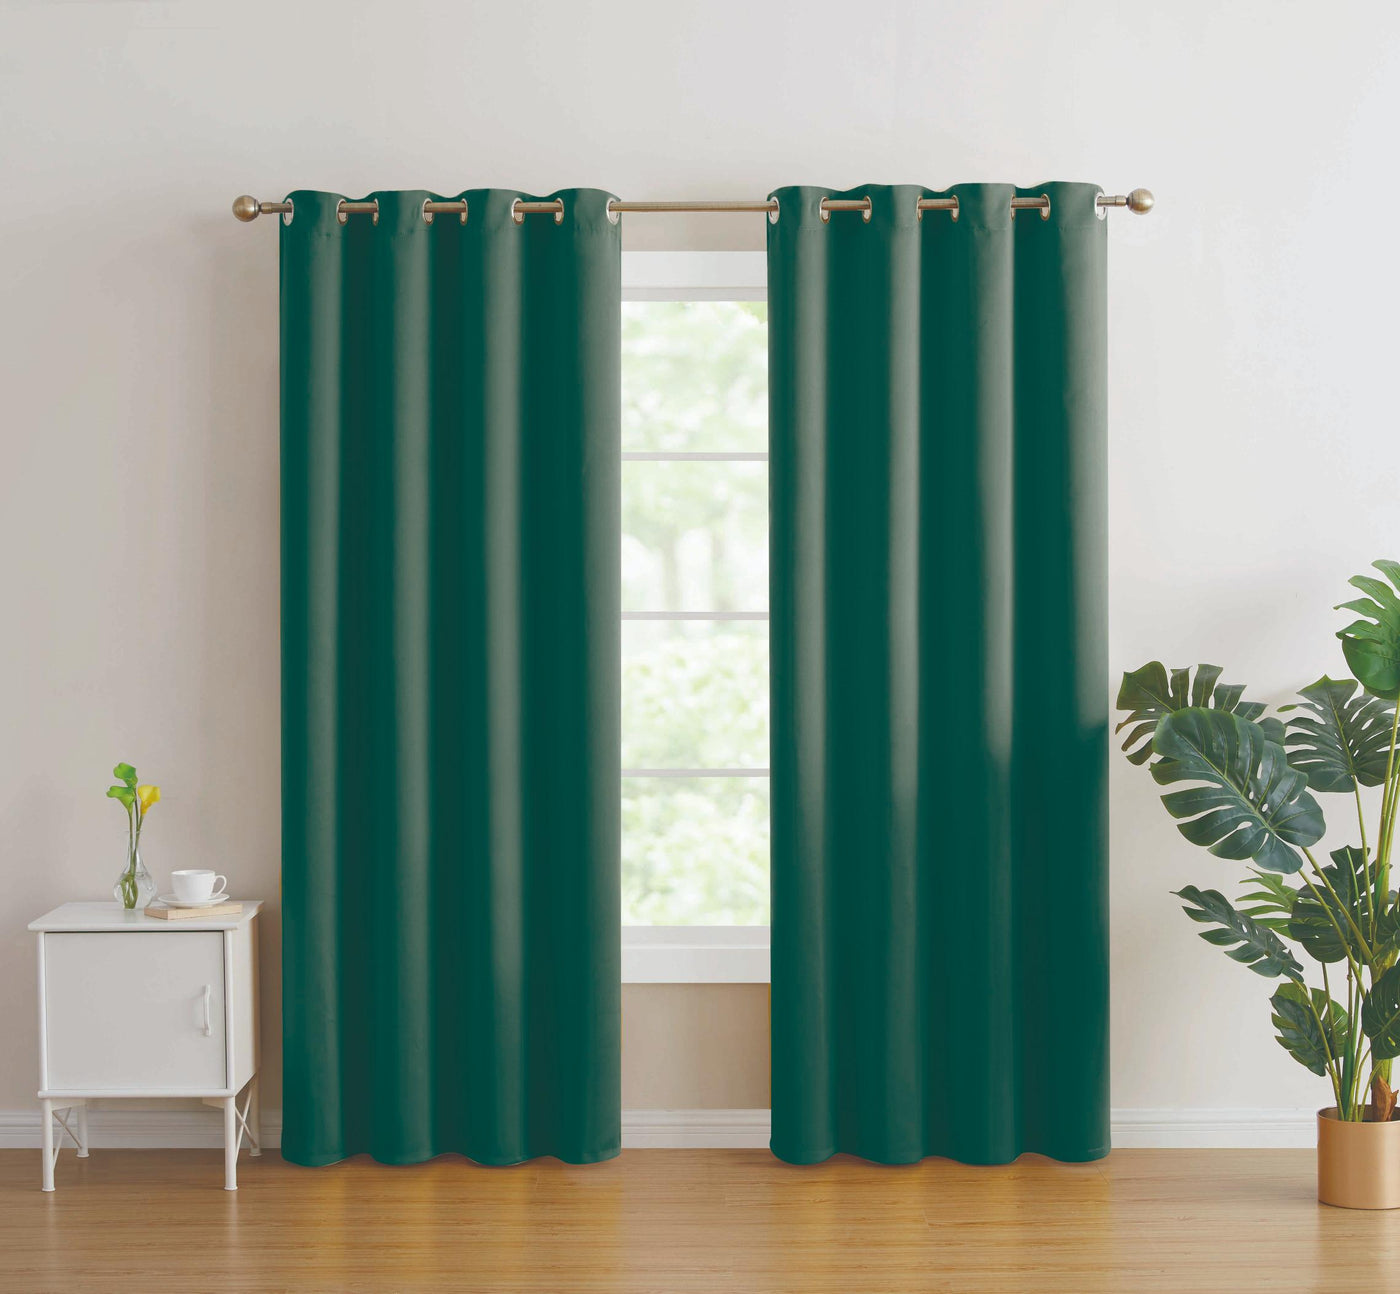 2pc Solid Grommet Thermal Insulated Window Curtain Panels Room Darkening Blackout 108"